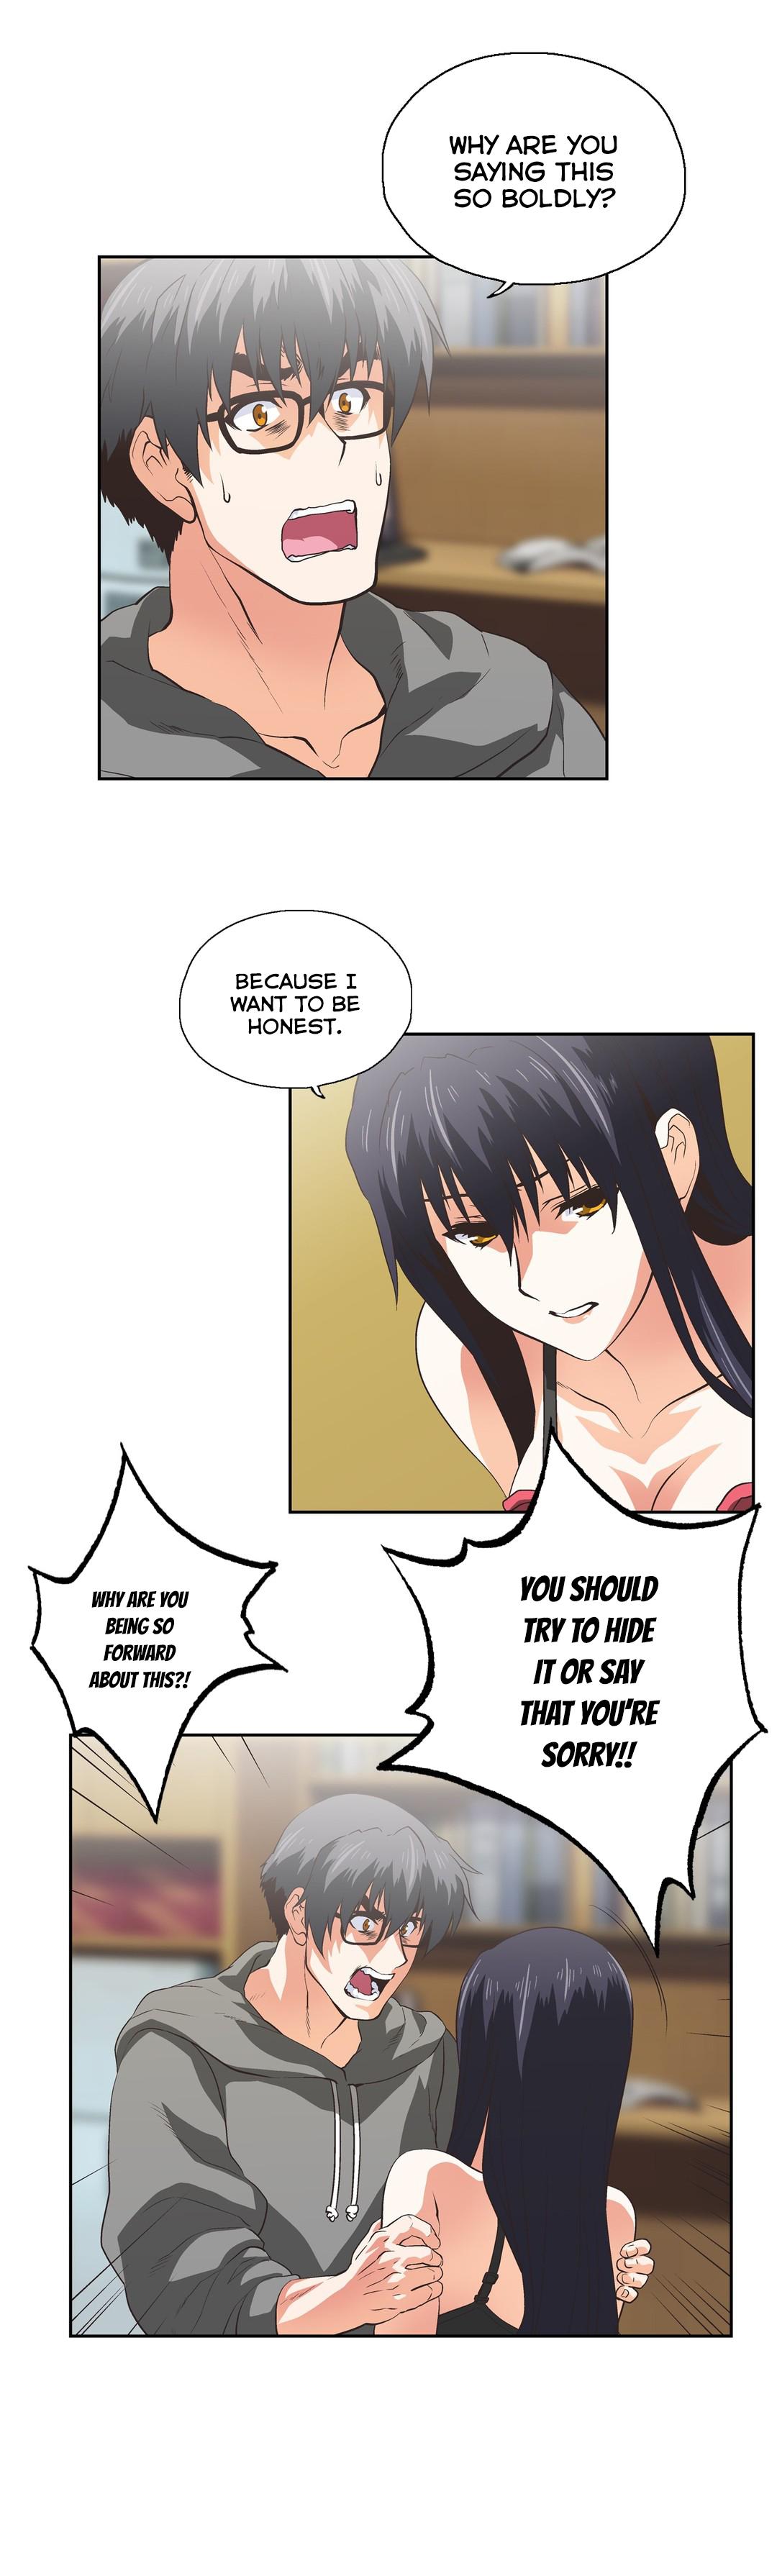 Blowjobs SStudy Ch.75 Best Blowjobs - Page 8